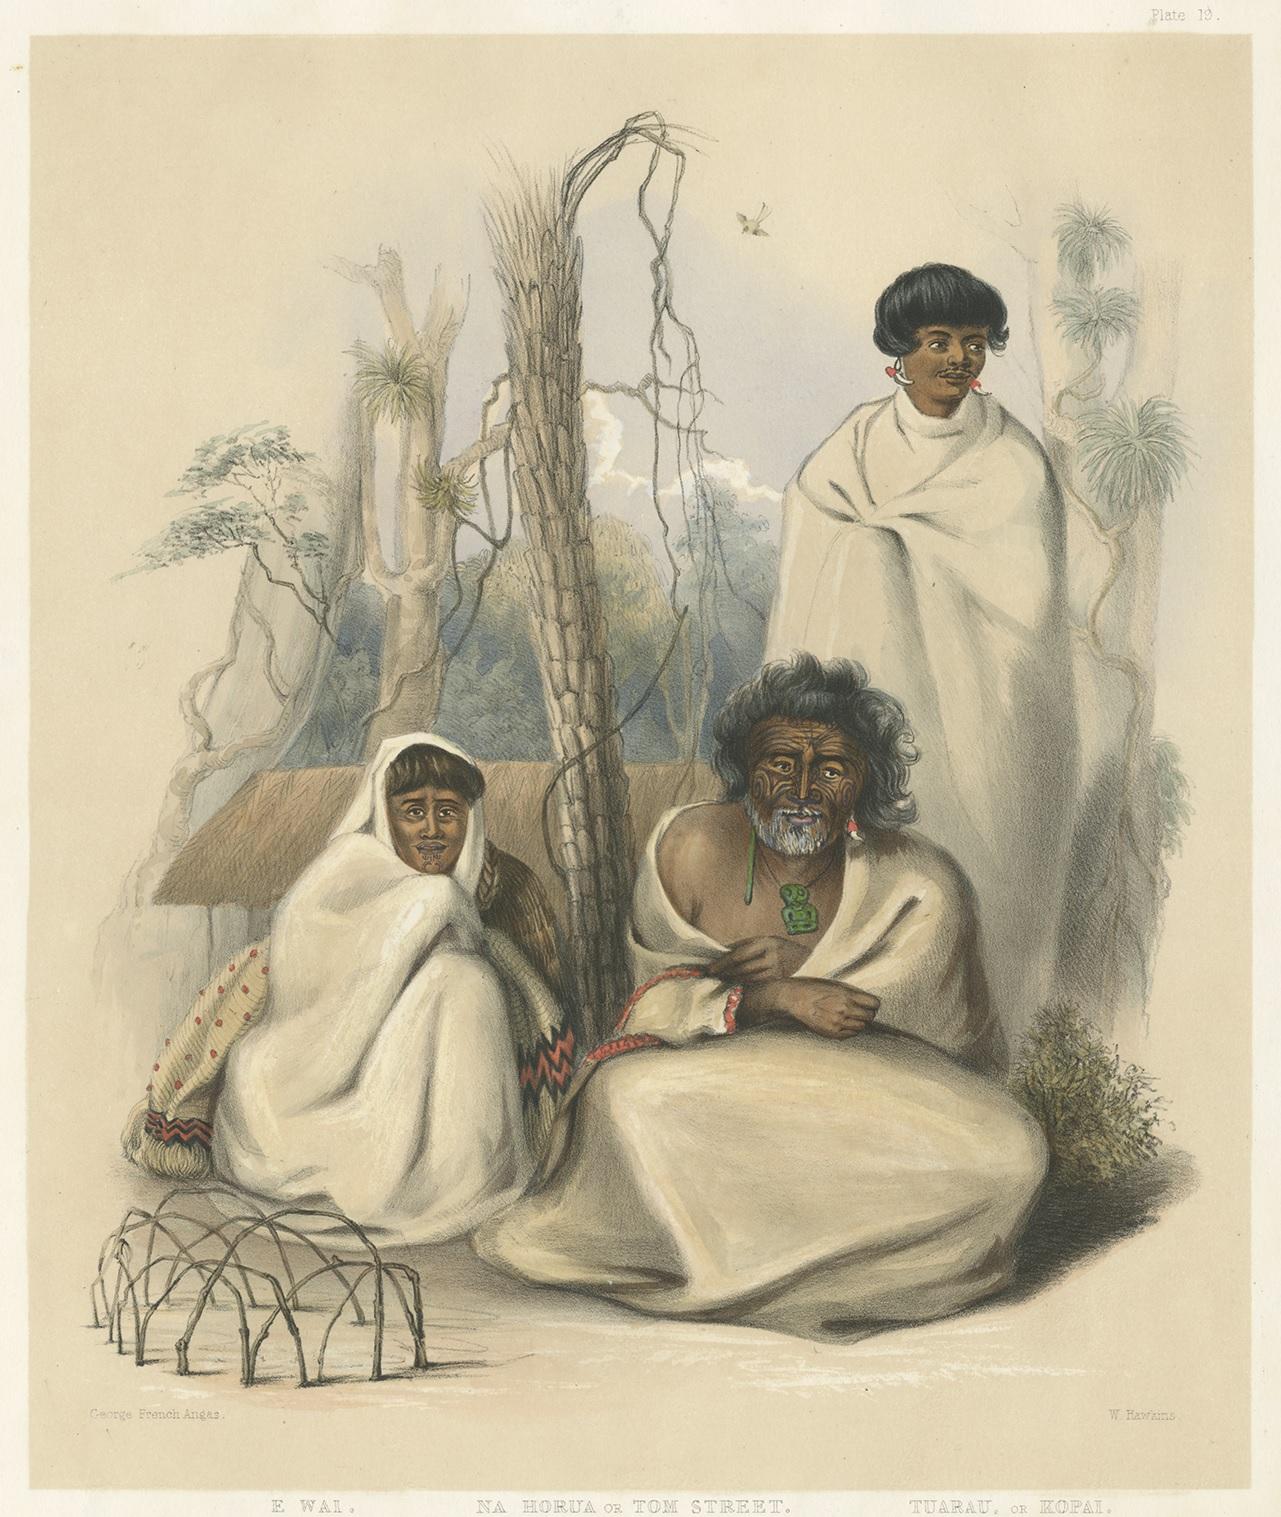 Antique print titled 'Na Horua or Tom Street'. Lithograph of Na Horua, who is more generally known in Cook's Straits as 